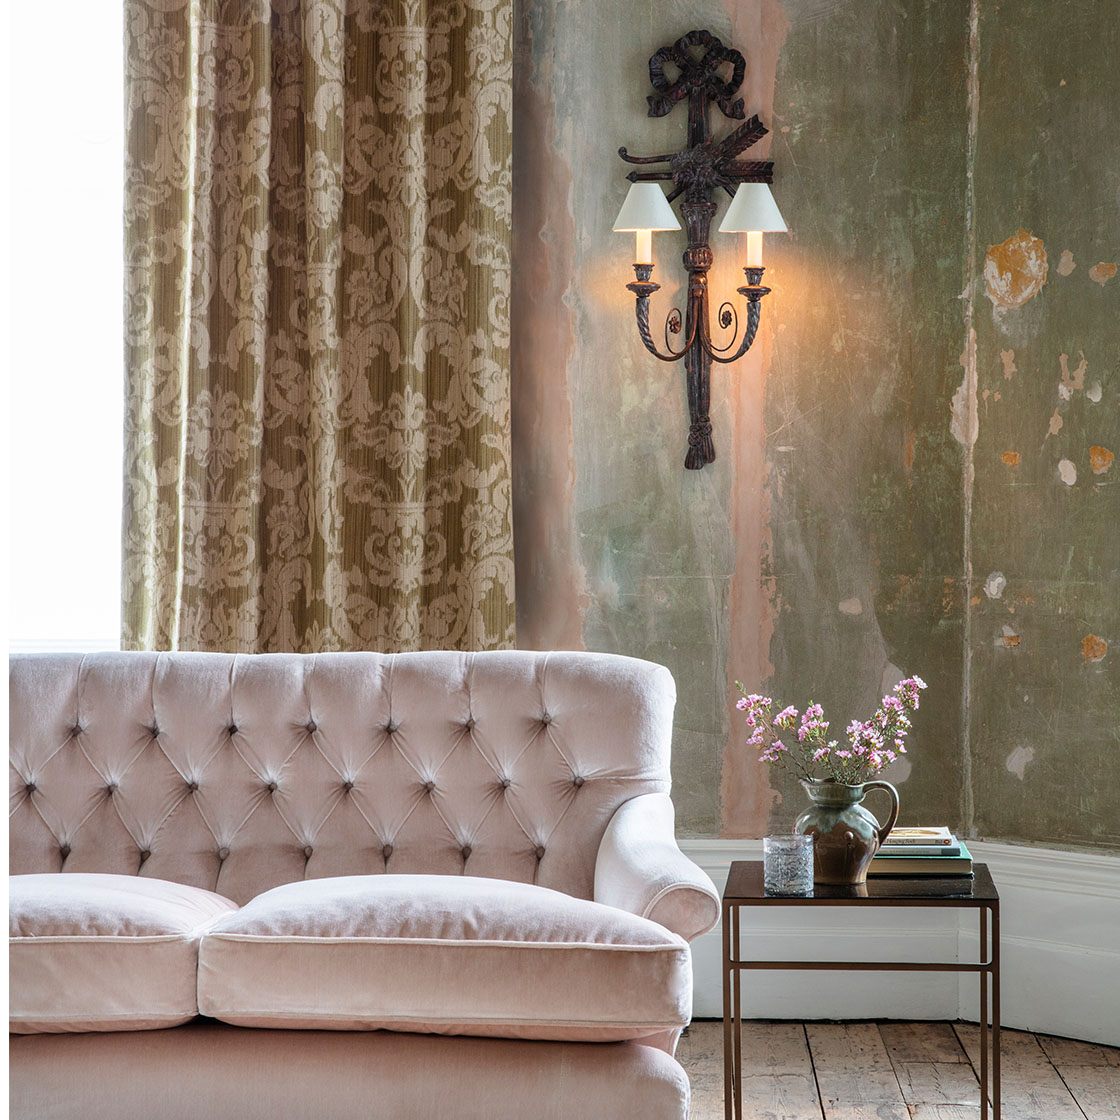 Minerva light in Oxidised real silver with Emily sofa and drapes in Wicklow - Gorse - Beaumont & Fletcher